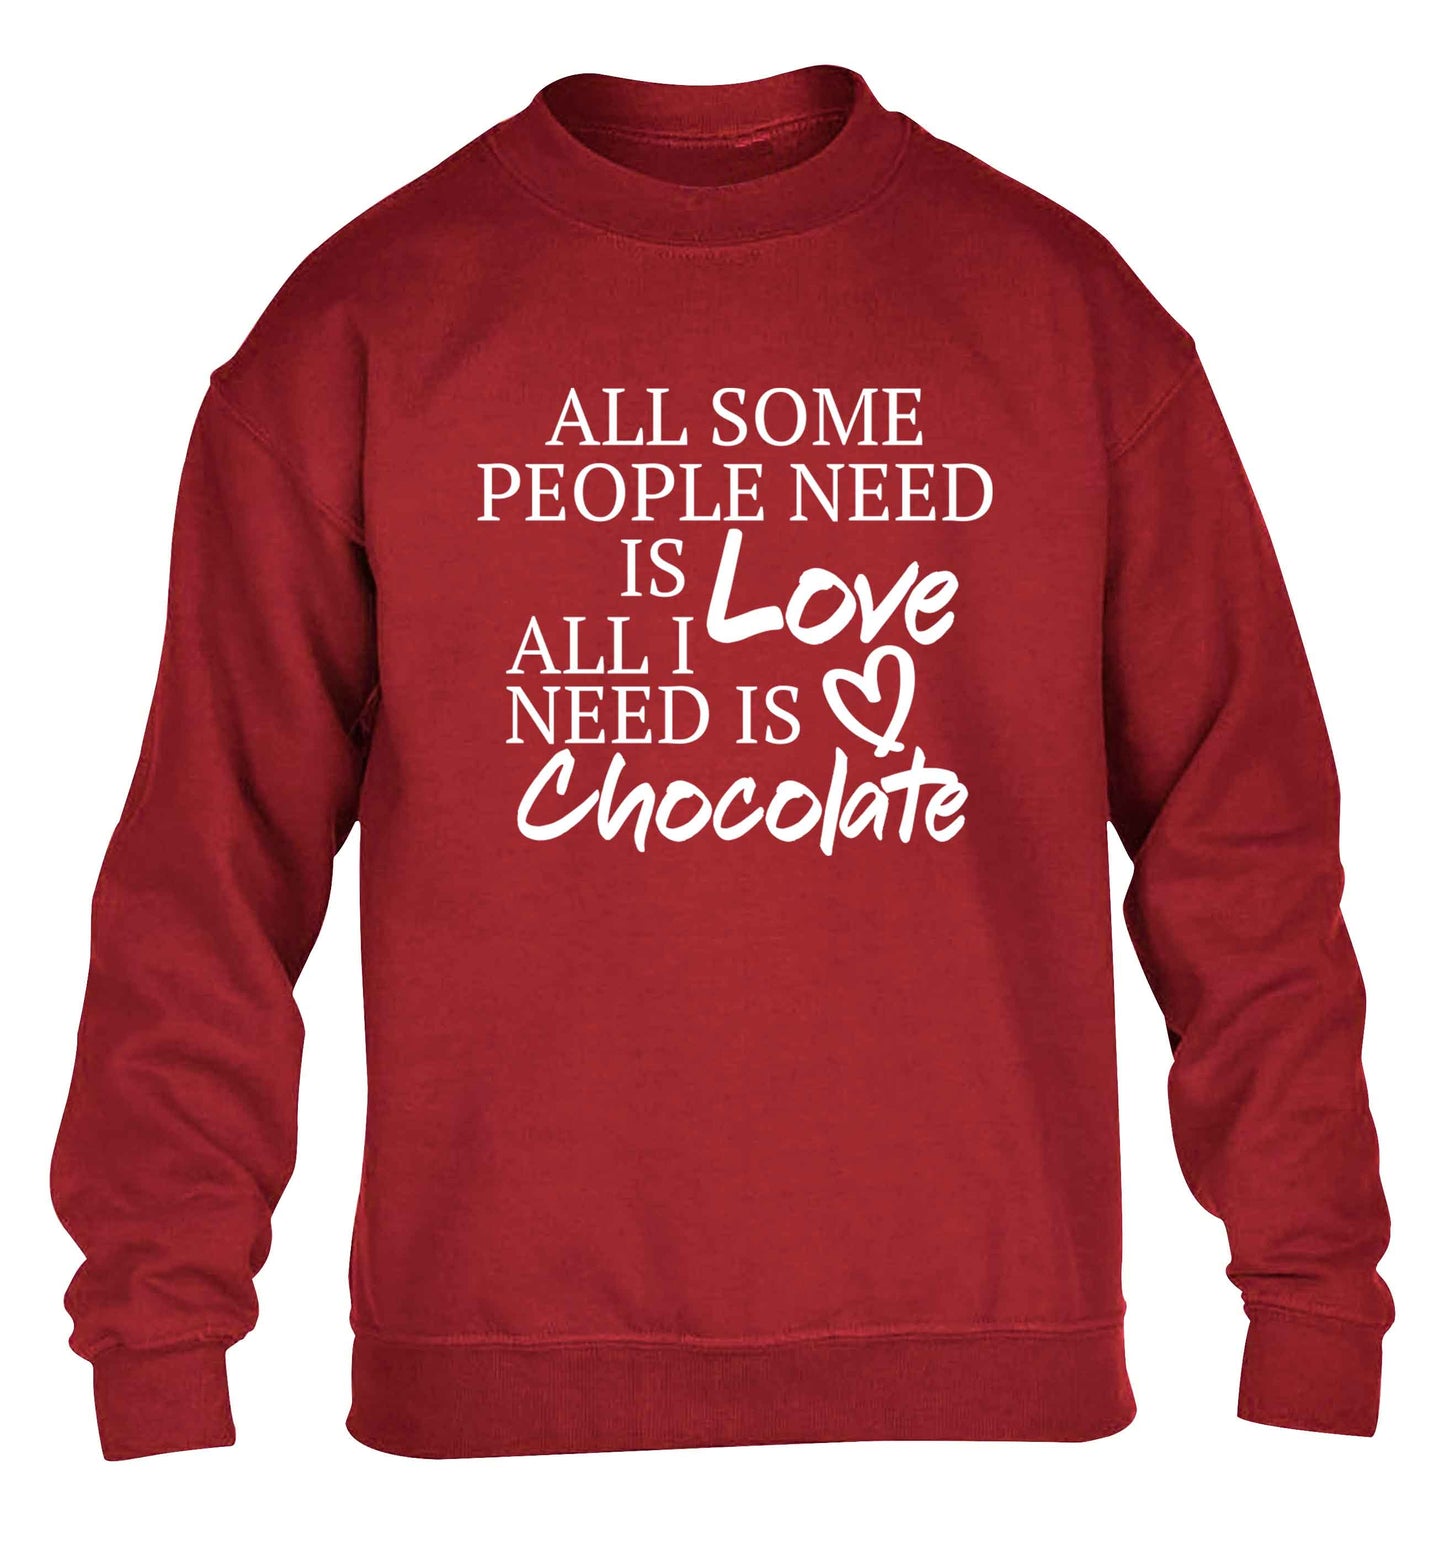 All some people need is love all I need is chocolate children's grey sweater 12-13 Years